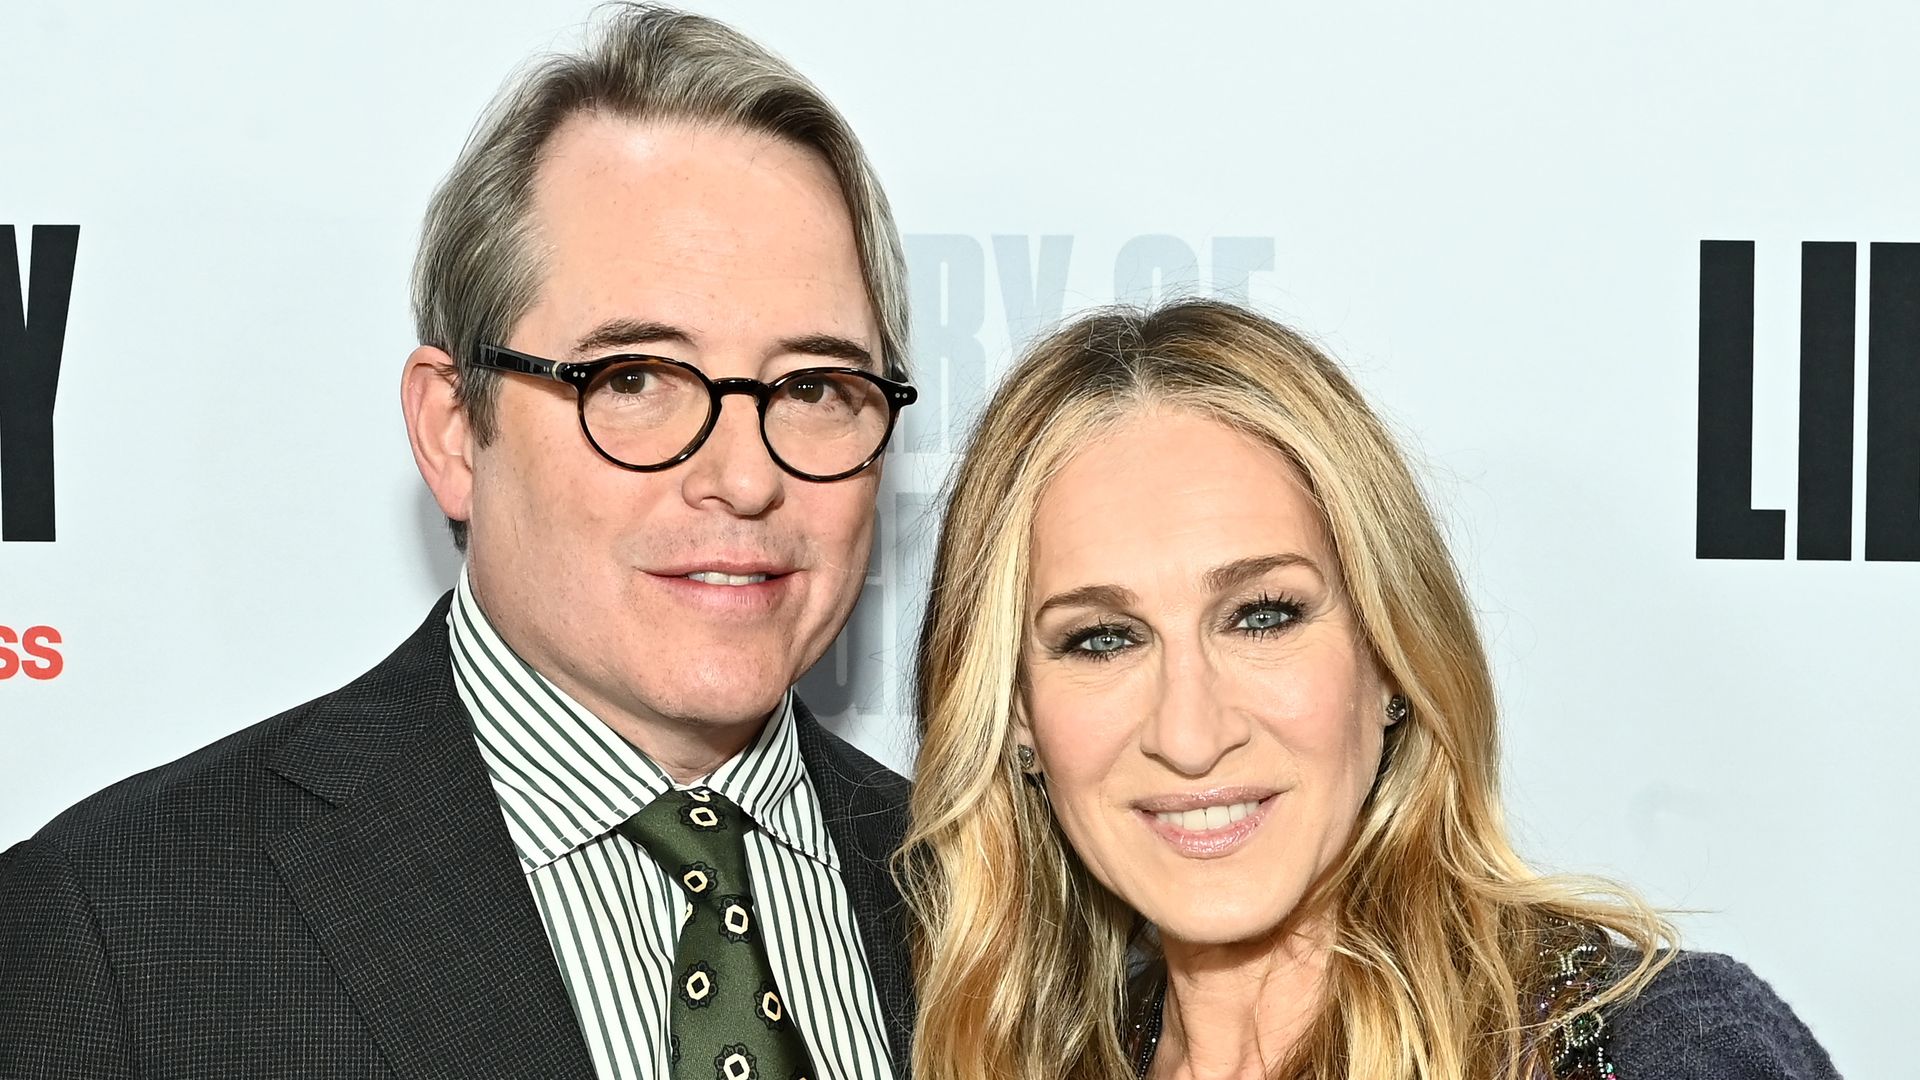 Matthew Broderick and Sarah Jessica Parker attend A Conversation with Sarah Jessica Parker and Matthew Broderick at the Library of Congress on April 25, 2022 in Washington, DC